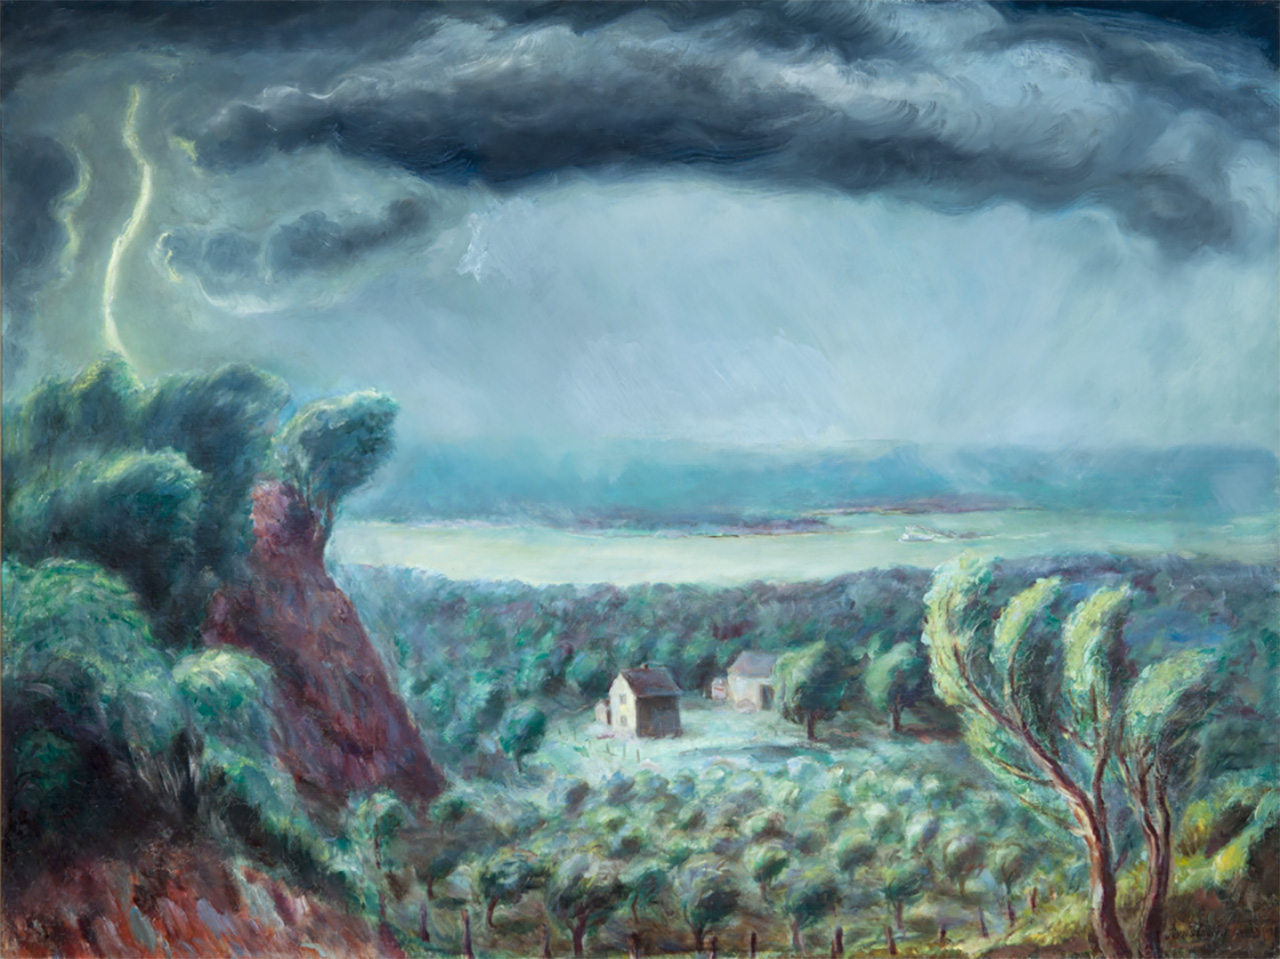 painting of stormy, rural landscape